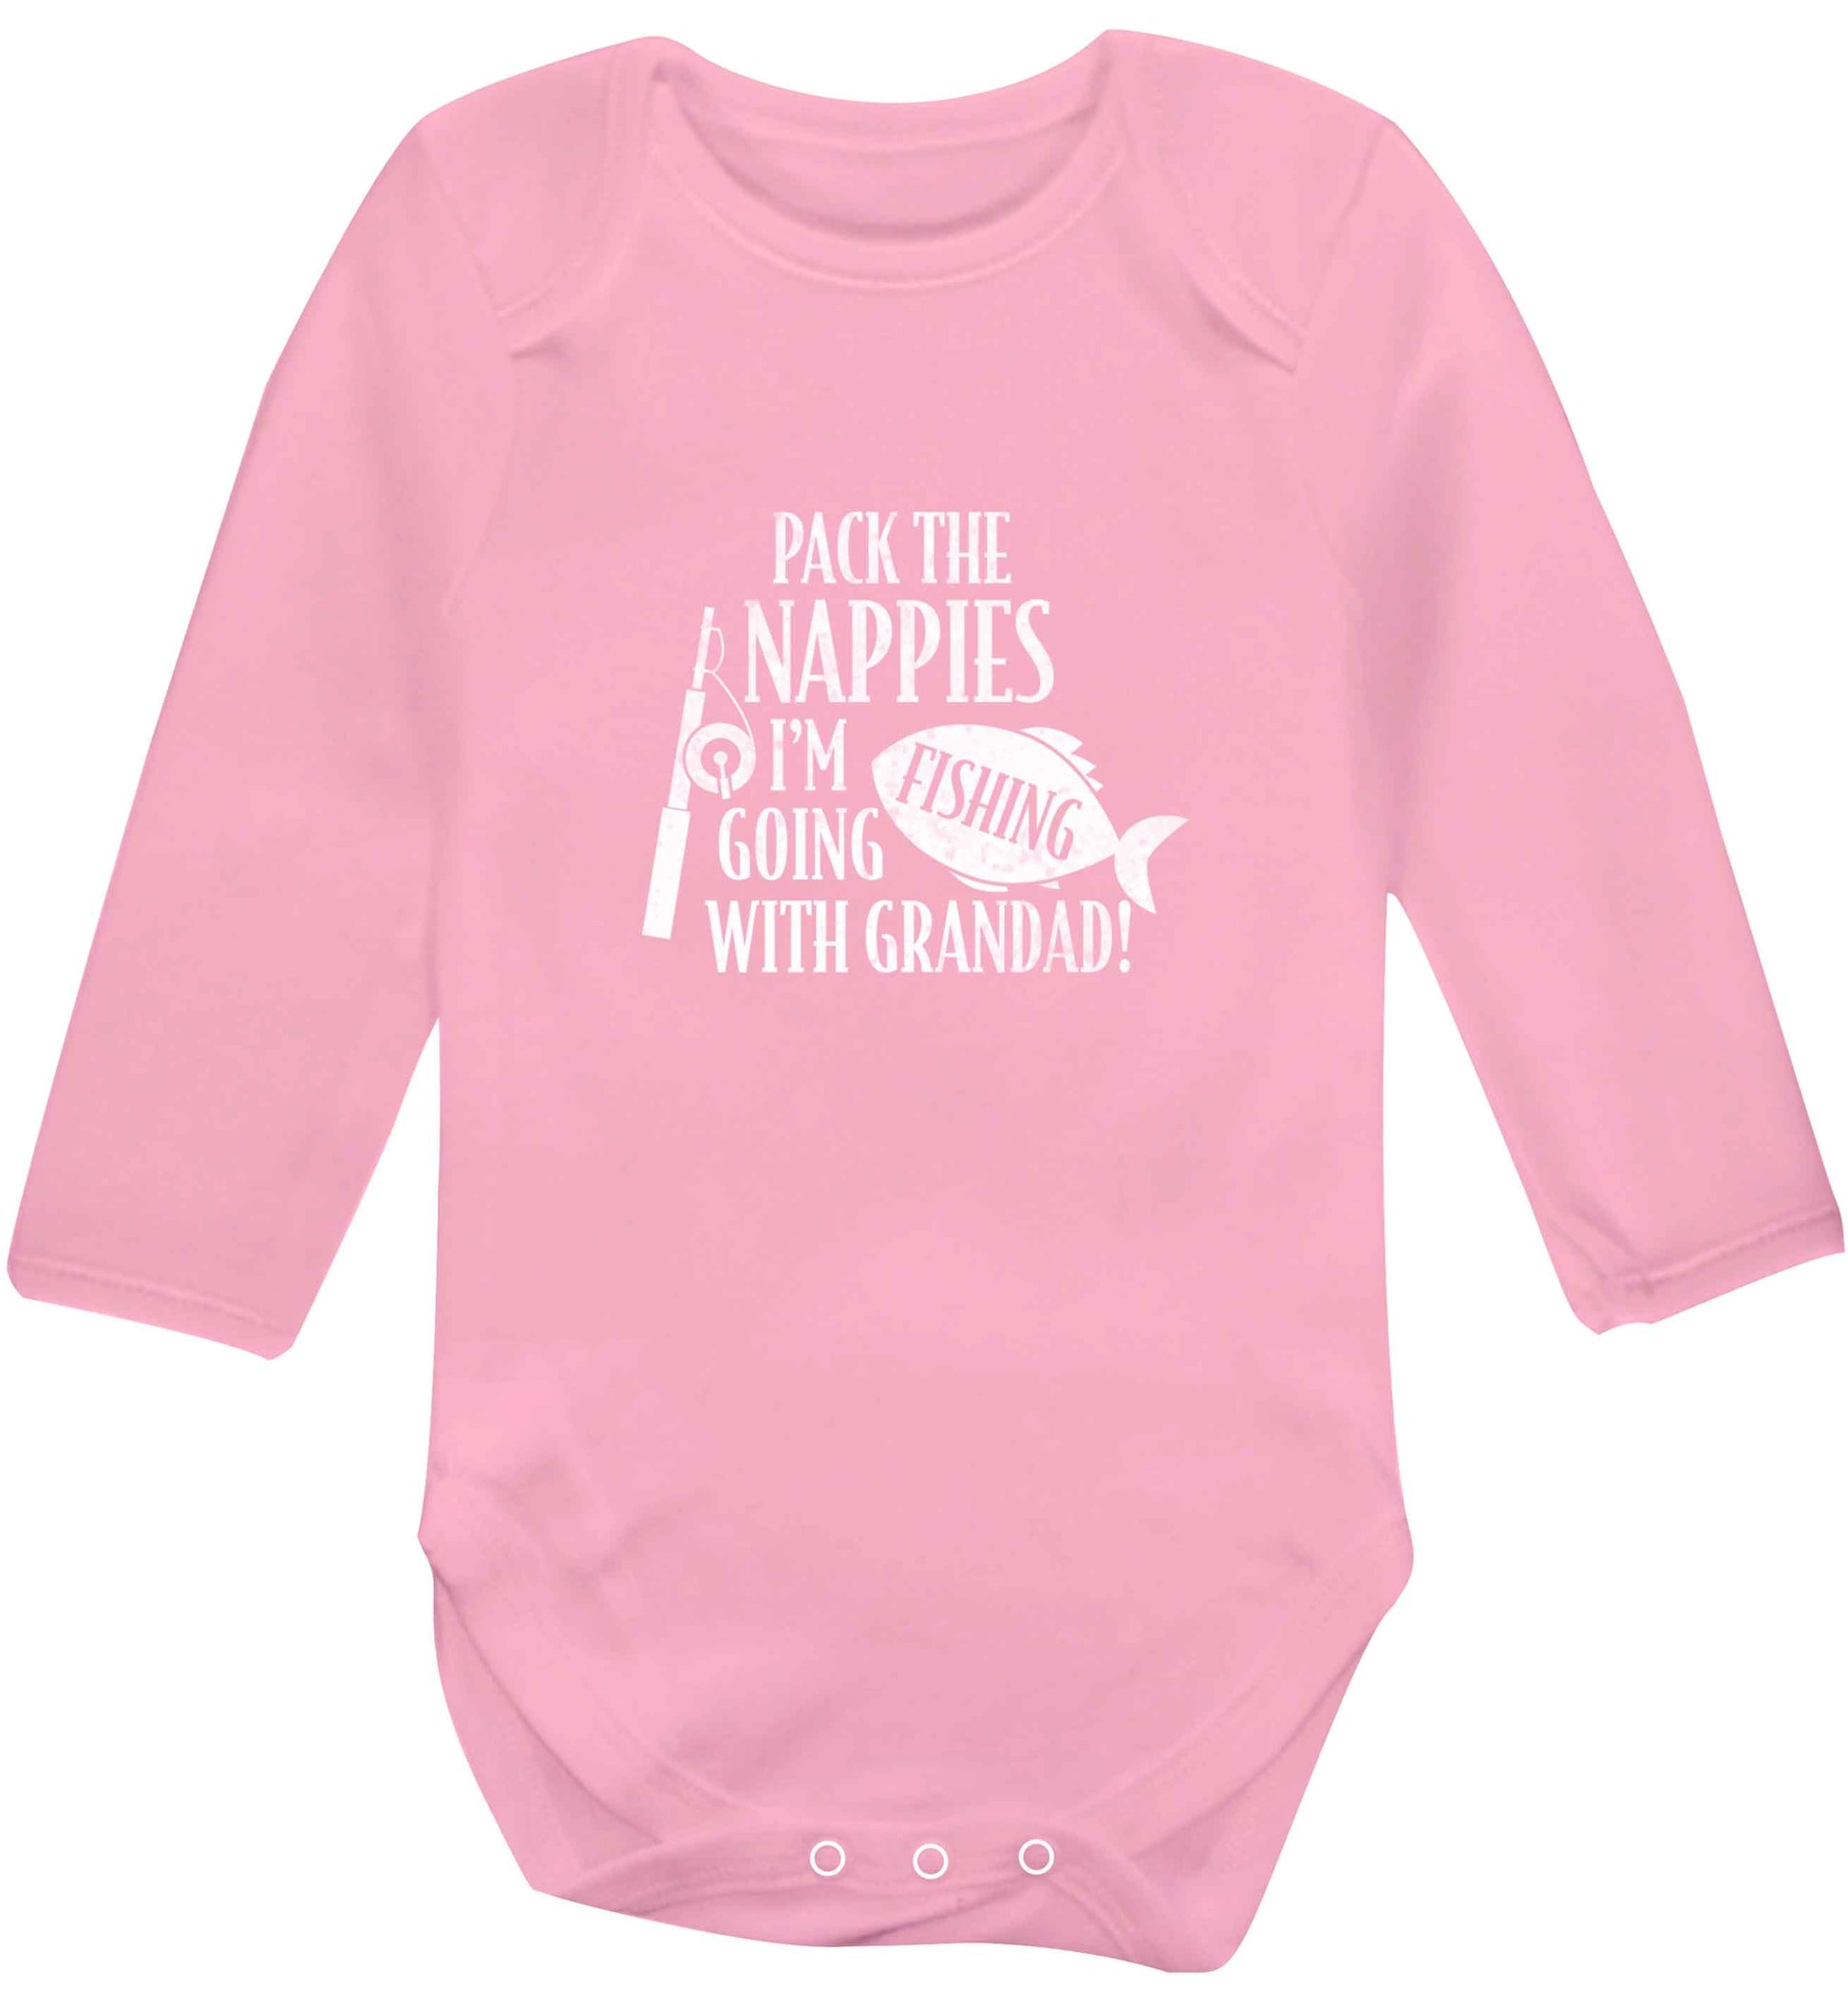 Pack the nappies I'm going fishing with Grandad baby vest long sleeved pale pink 6-12 months